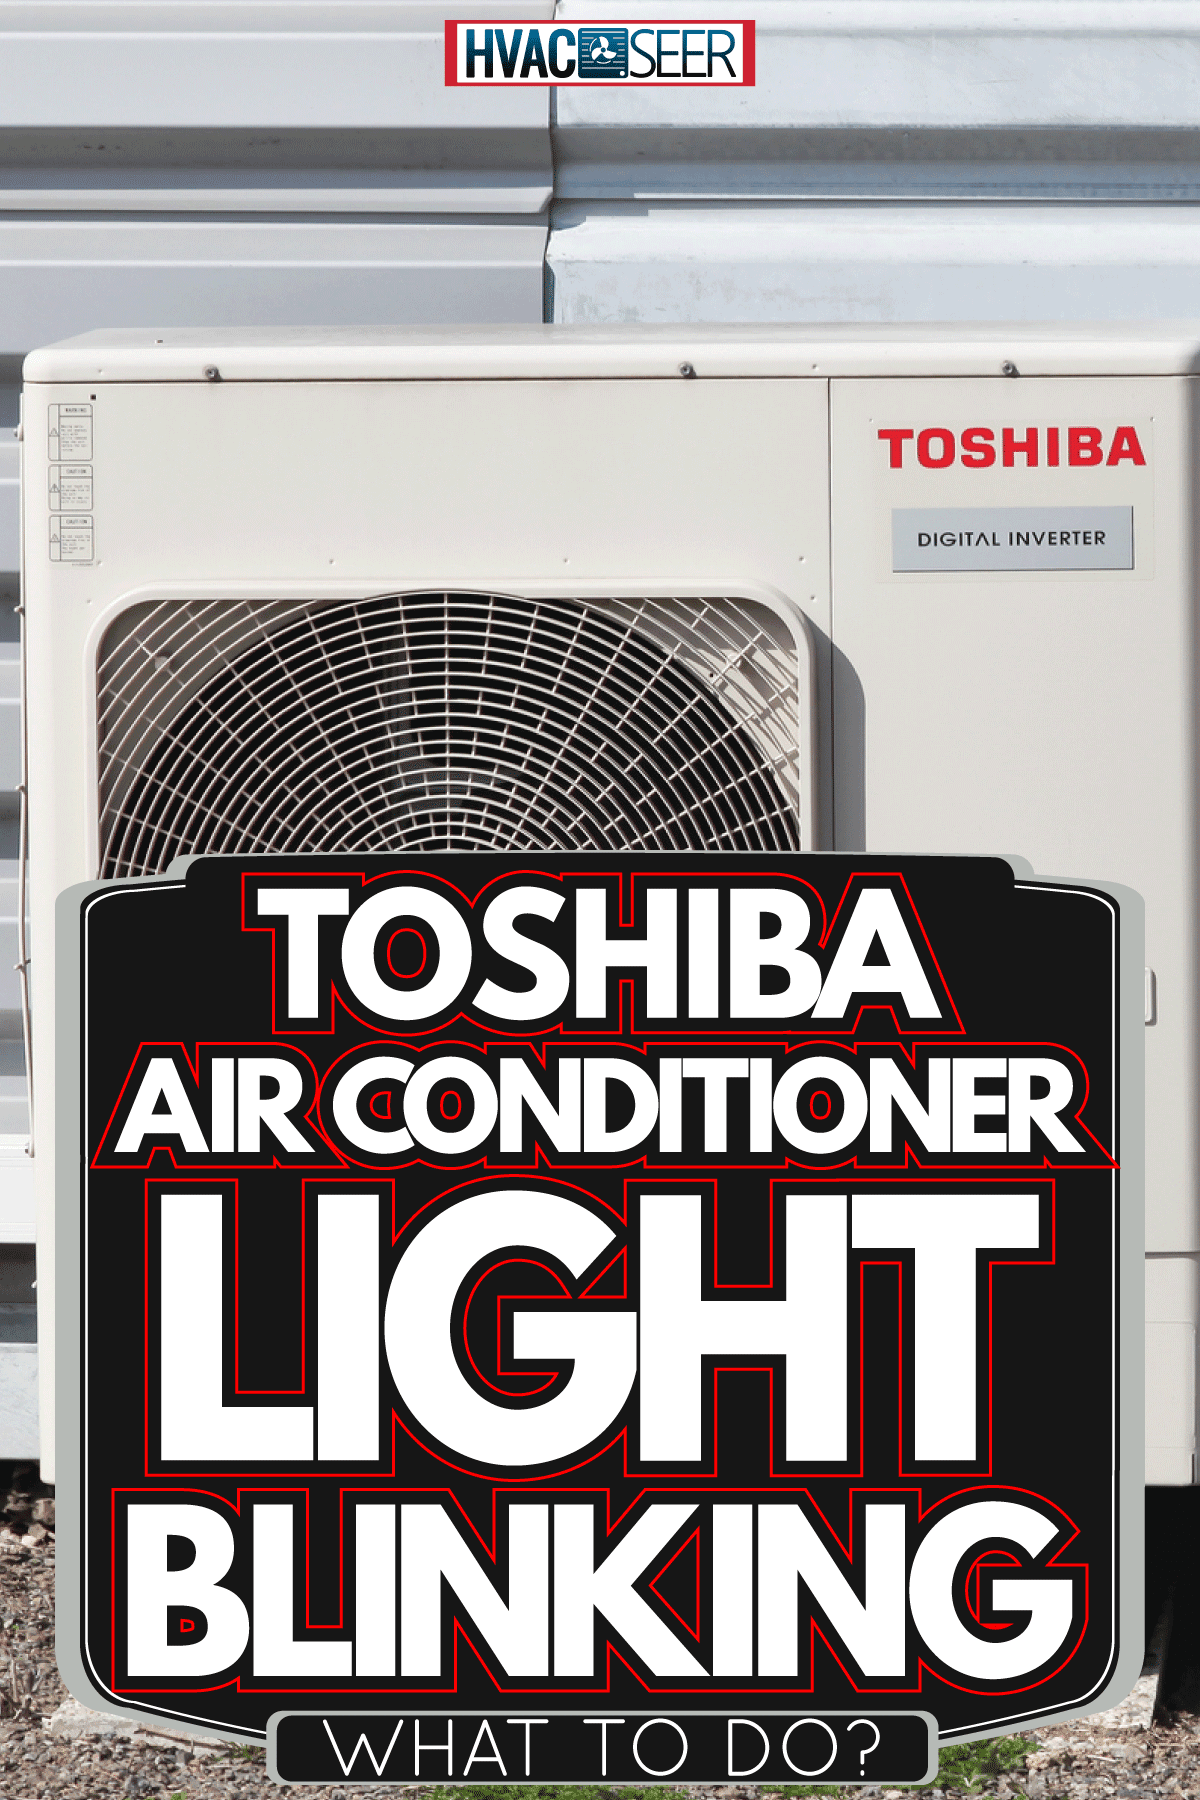 Toshiba air conditioner on a wall, Toshiba Air Conditioner Light Blinking - What To Do?